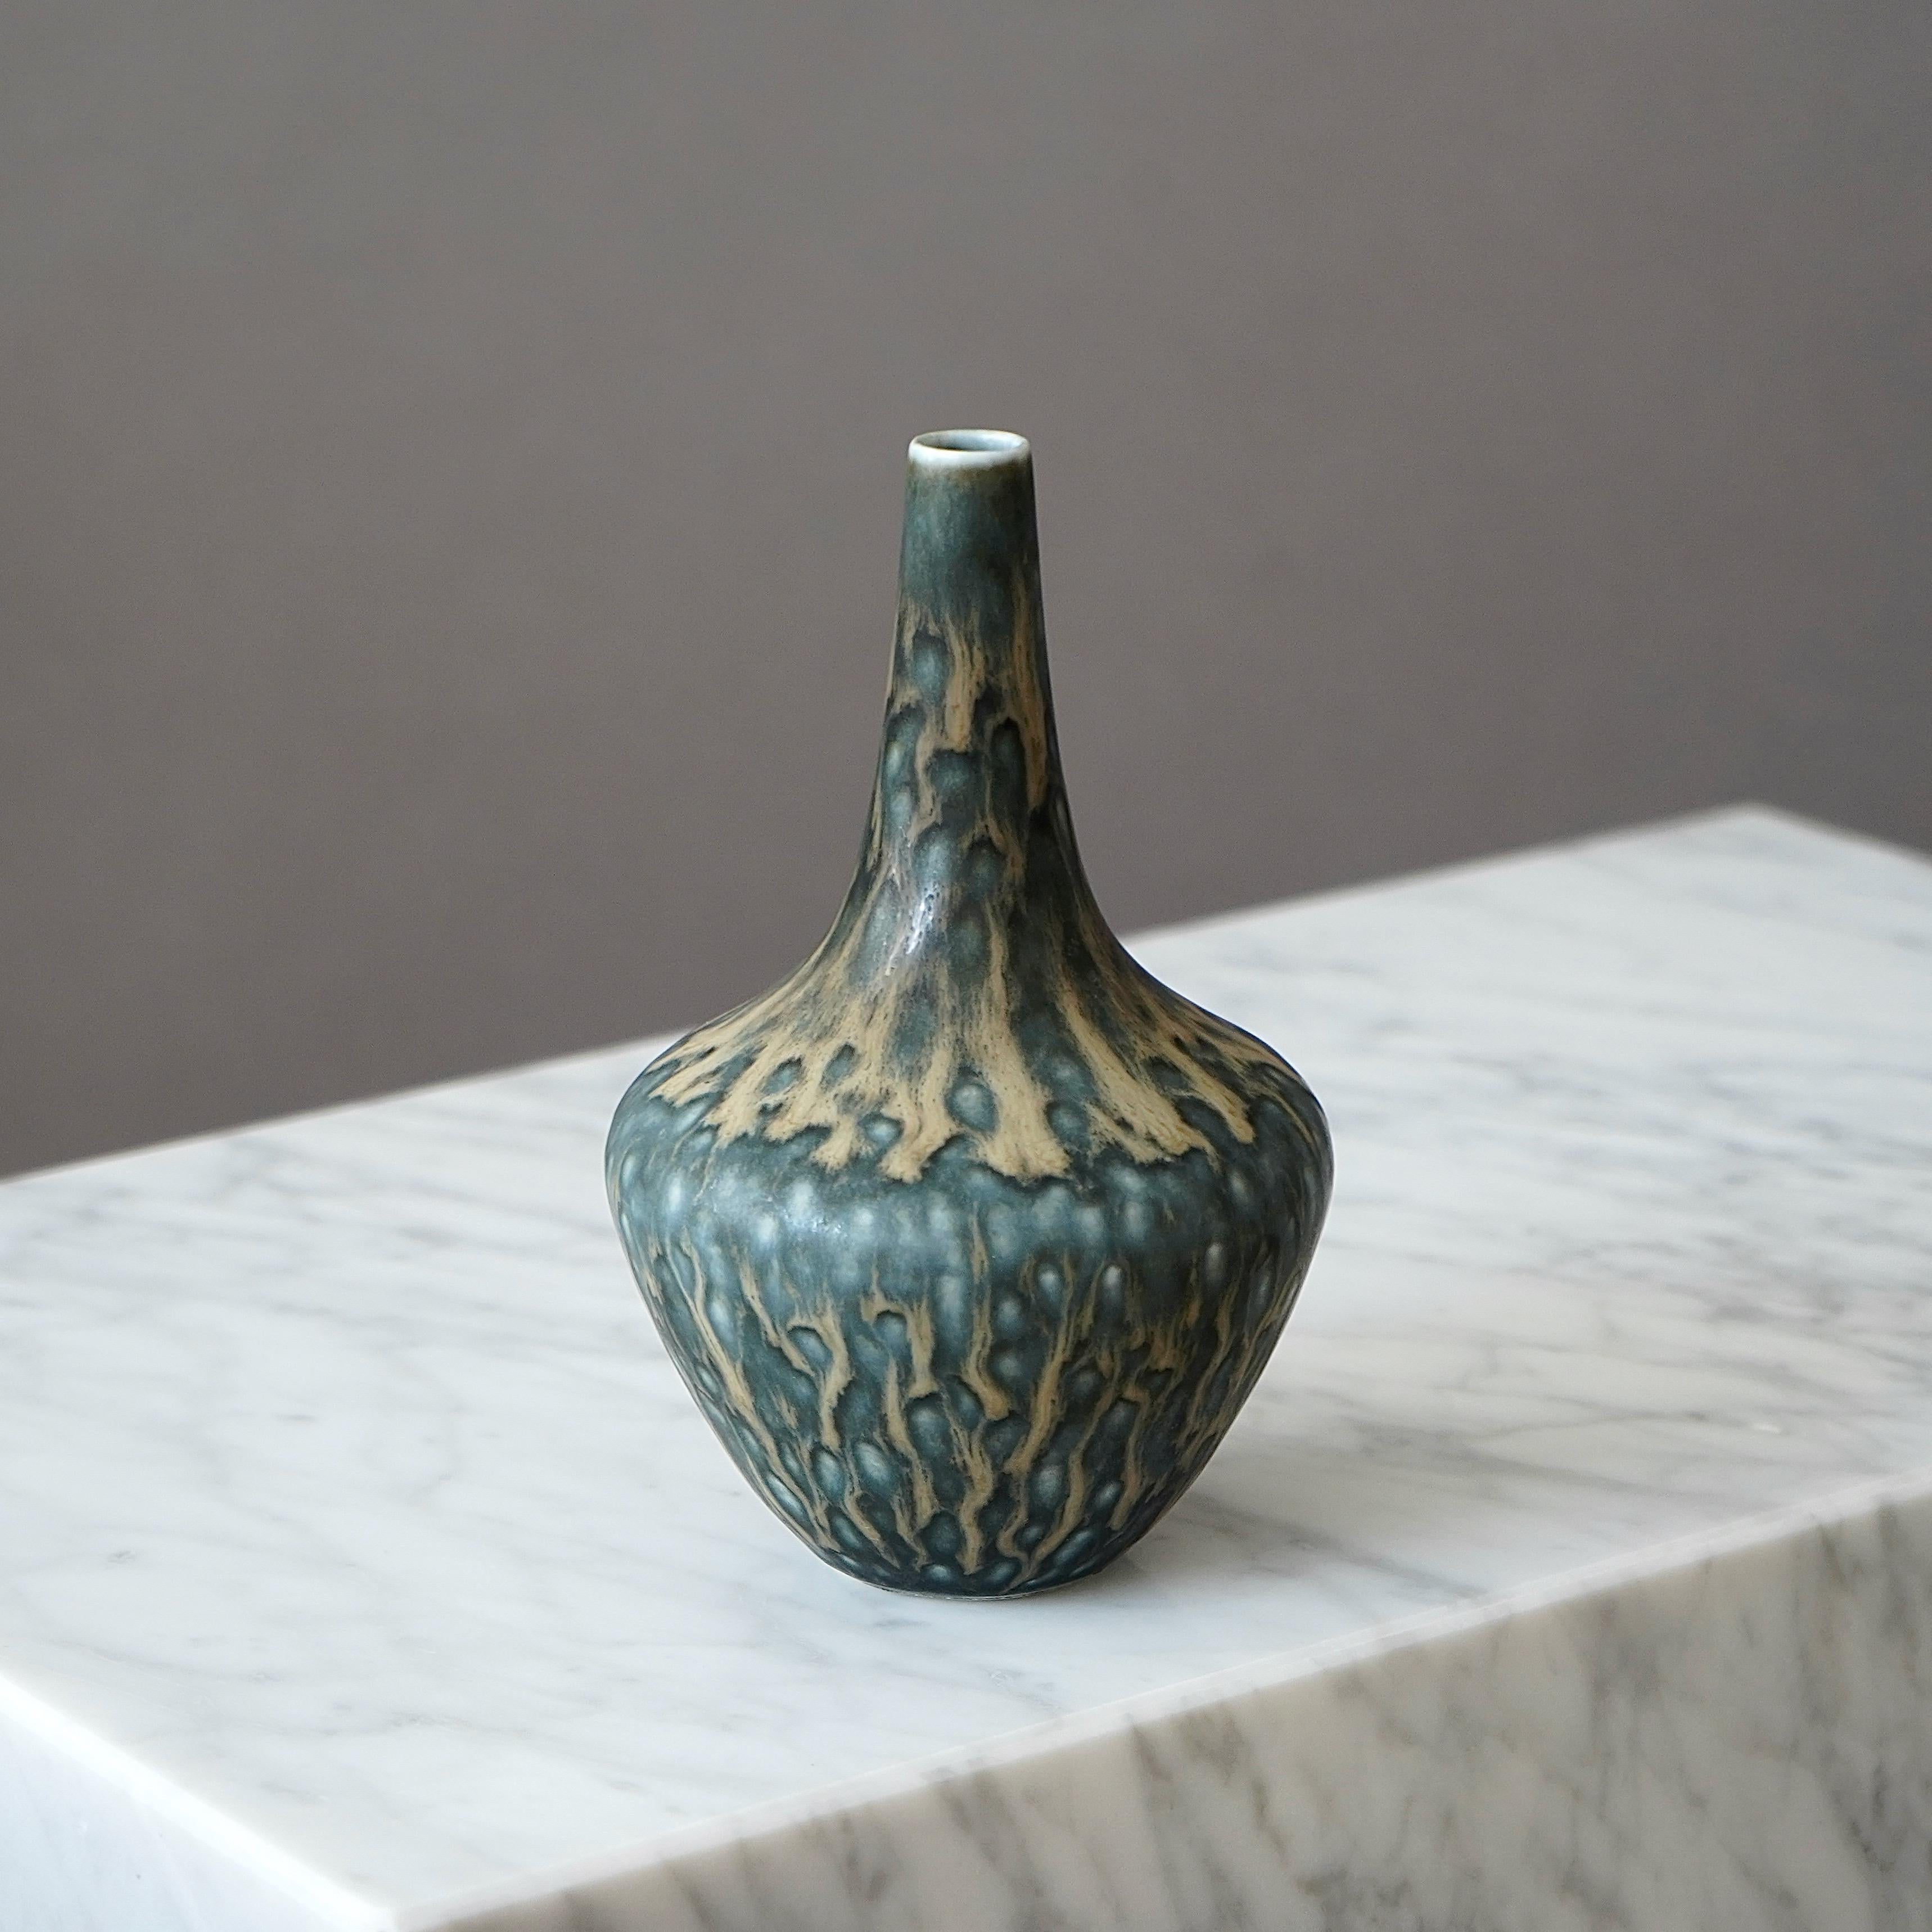 A beautiful stoneware vase with amazing glaze. 
Designed by Gunnar Nylund for Rorstrand, Sweden, 1950s.  

Excellent condition. Incised signature 